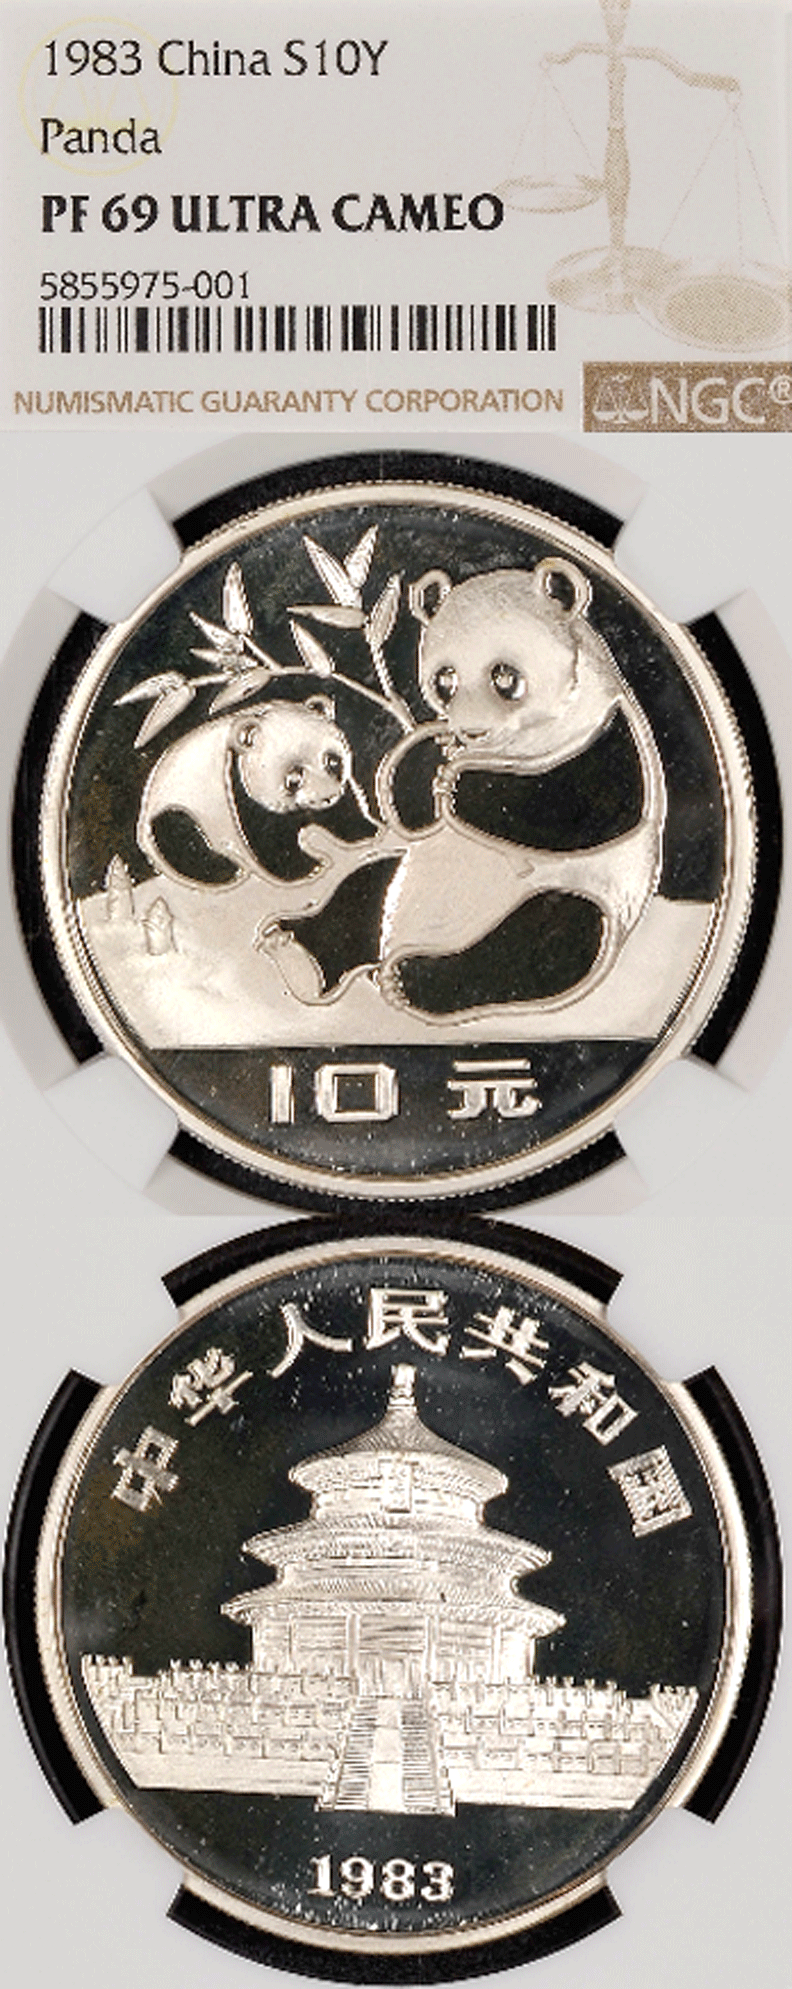 1983 S10Y First Year Silver Panda NGC PF 69 Ultra Cameo